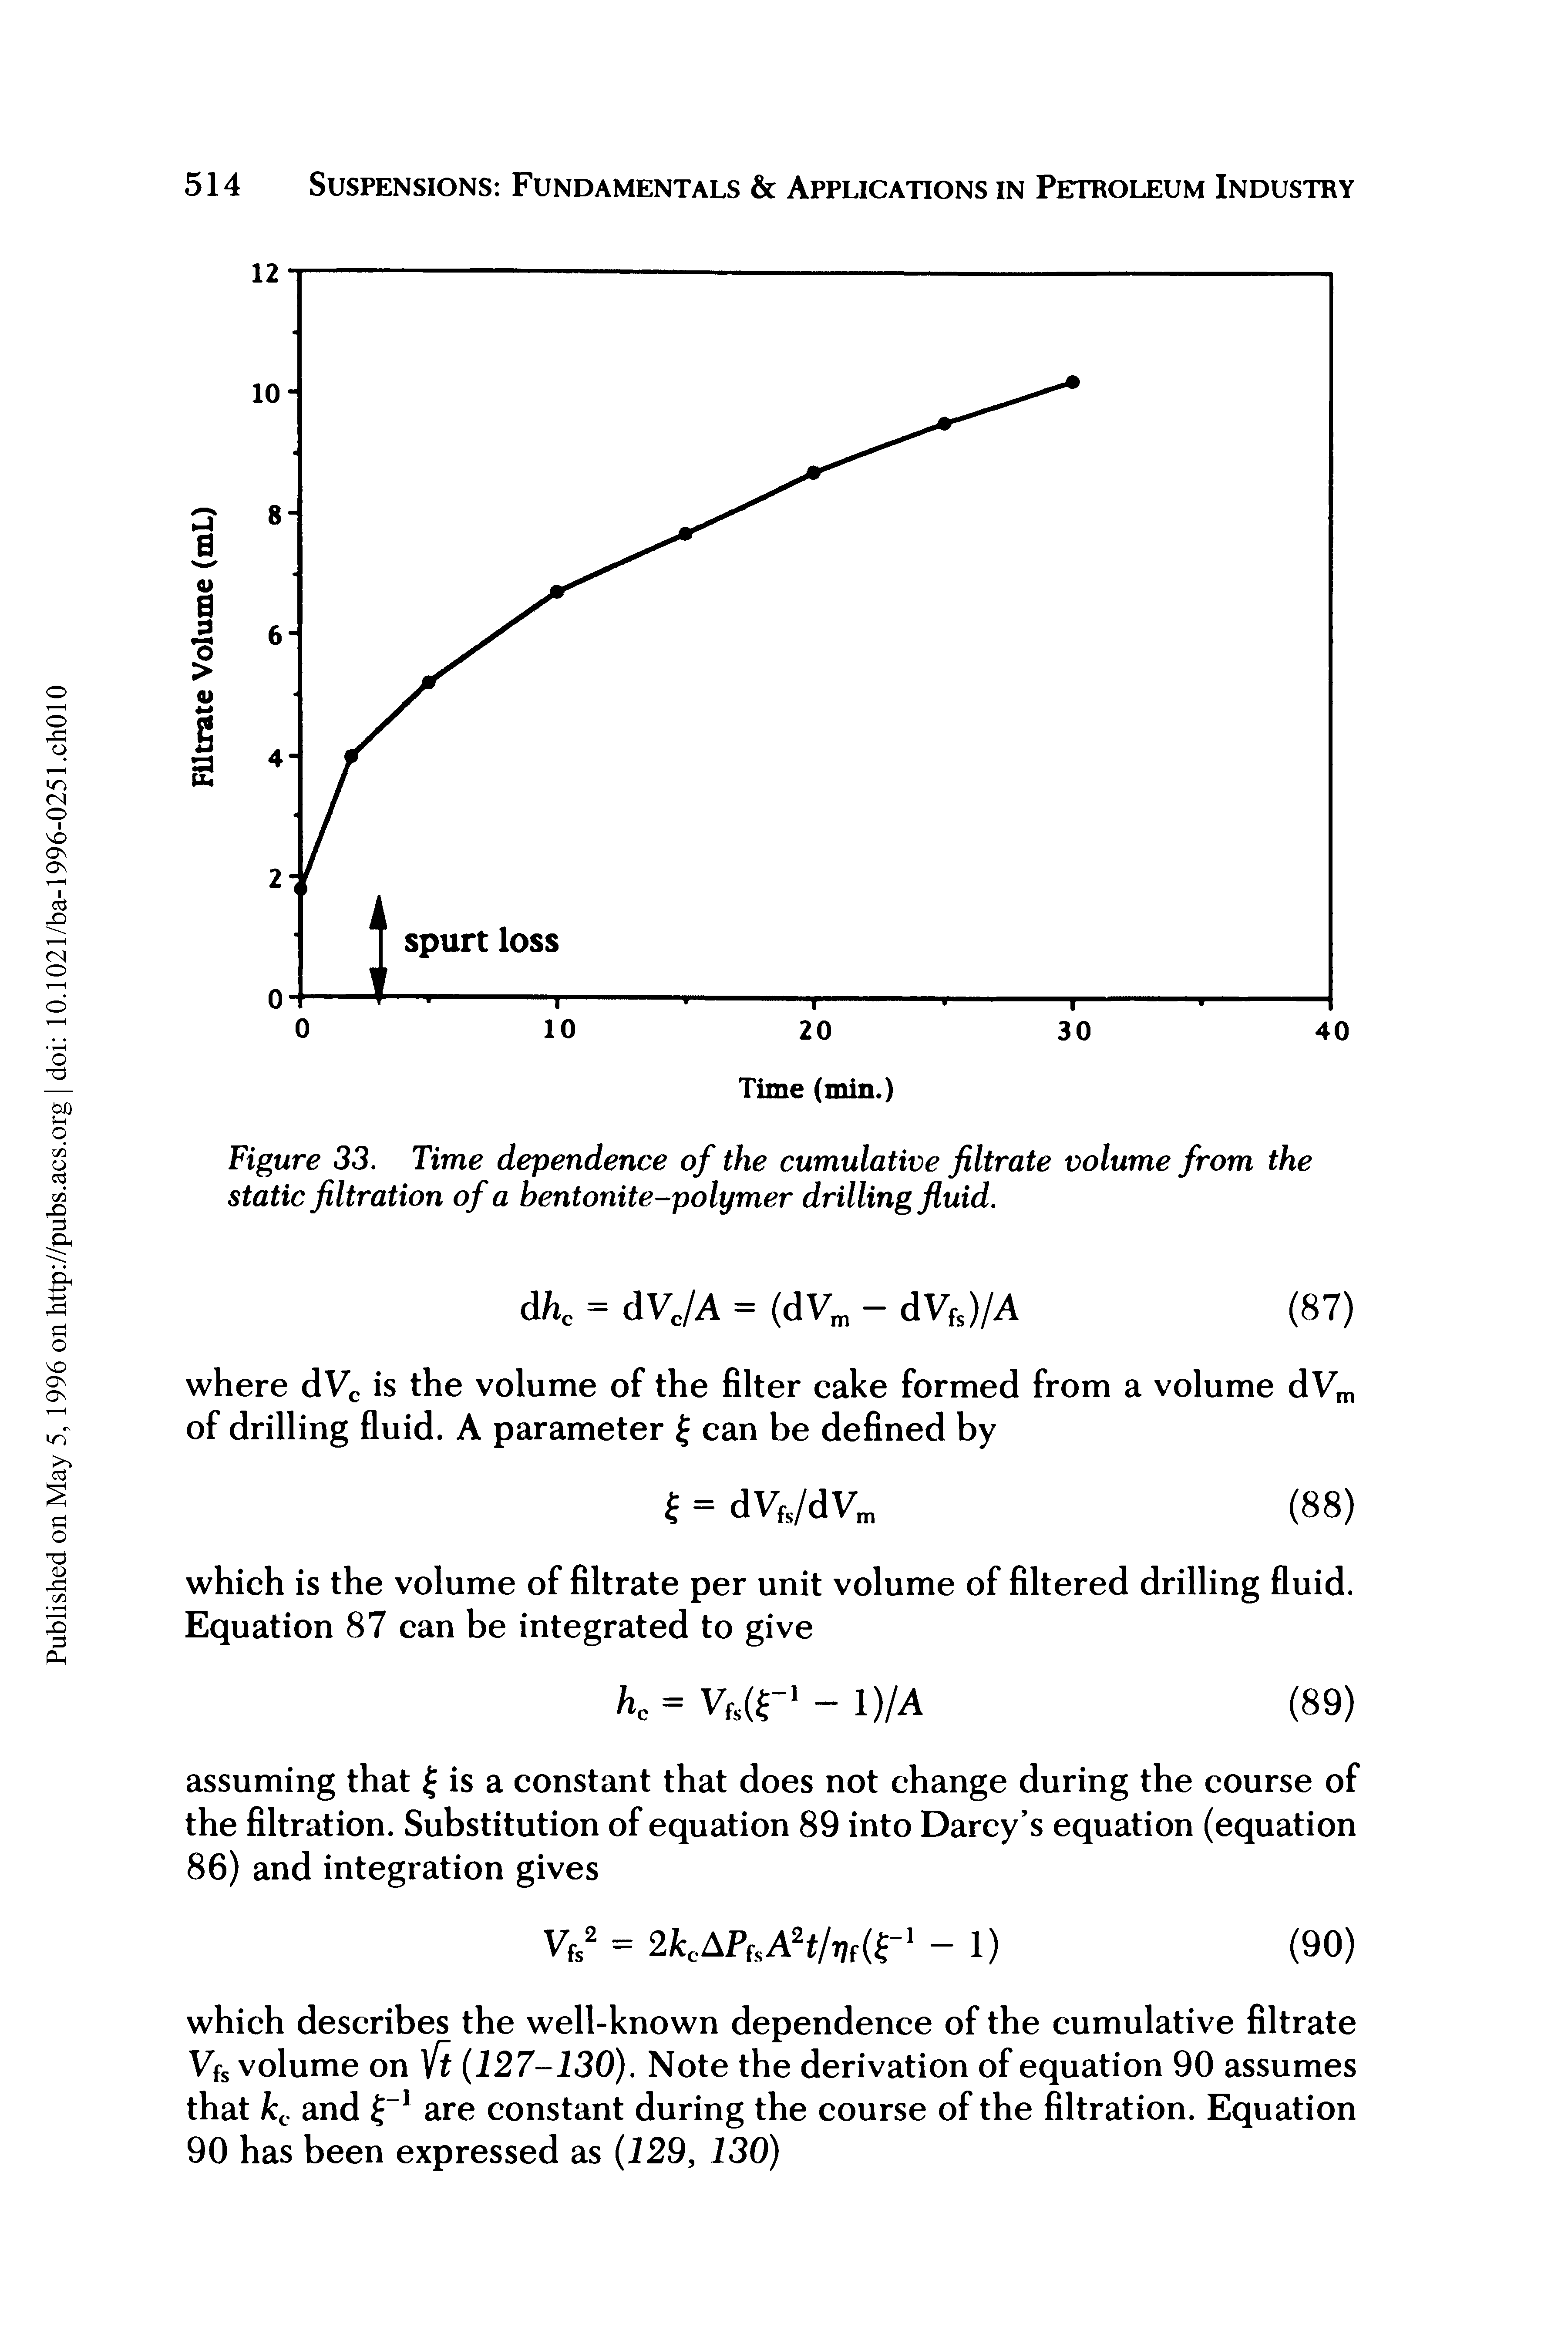 Figure 33. Time dependence of the cumulative filtrate volume from the static filtration of a bentonite-polymer drilling fluid.